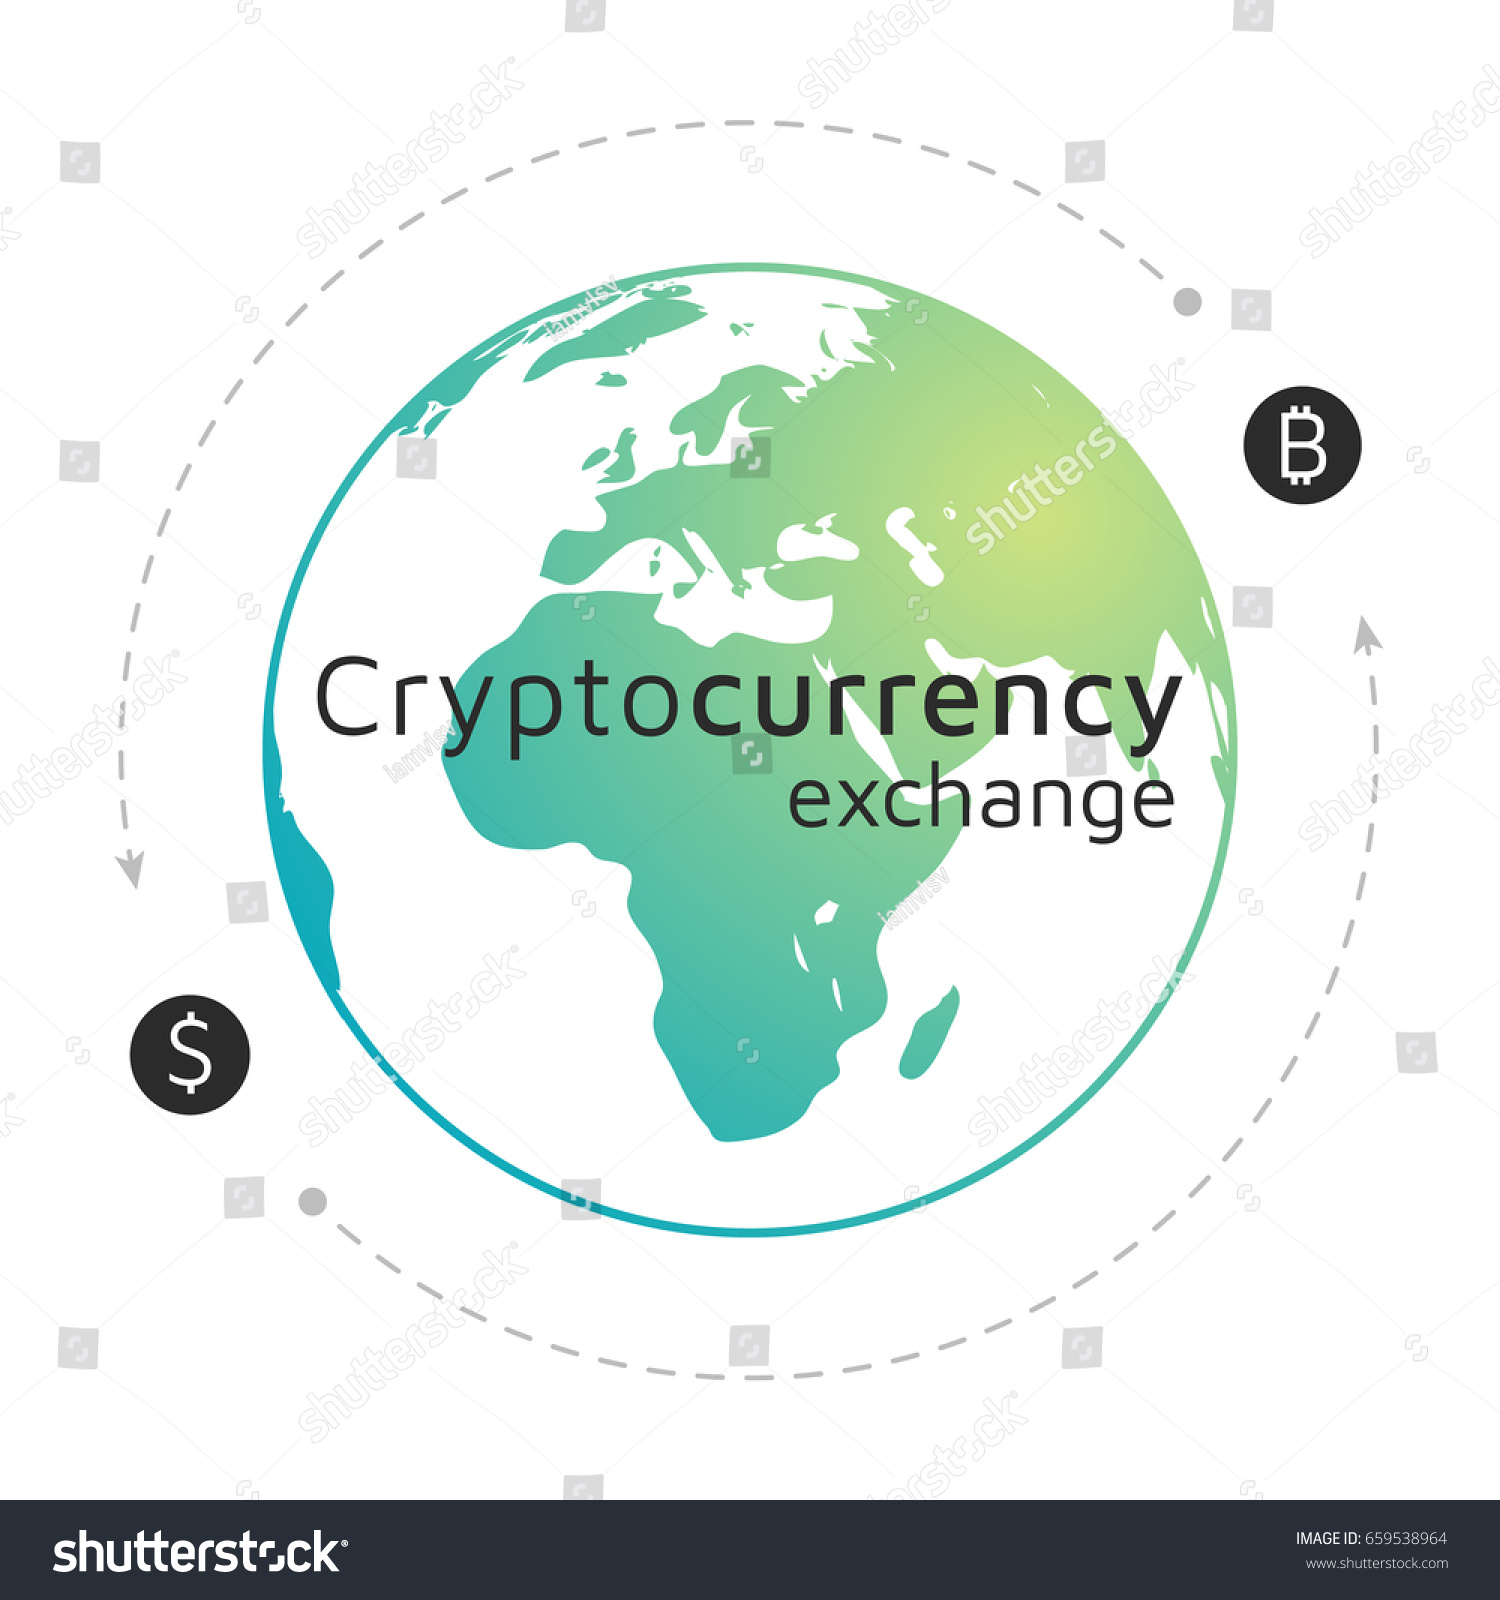 How To Exchange Cryptocurrency For Dollars? - Glowing Neon ...